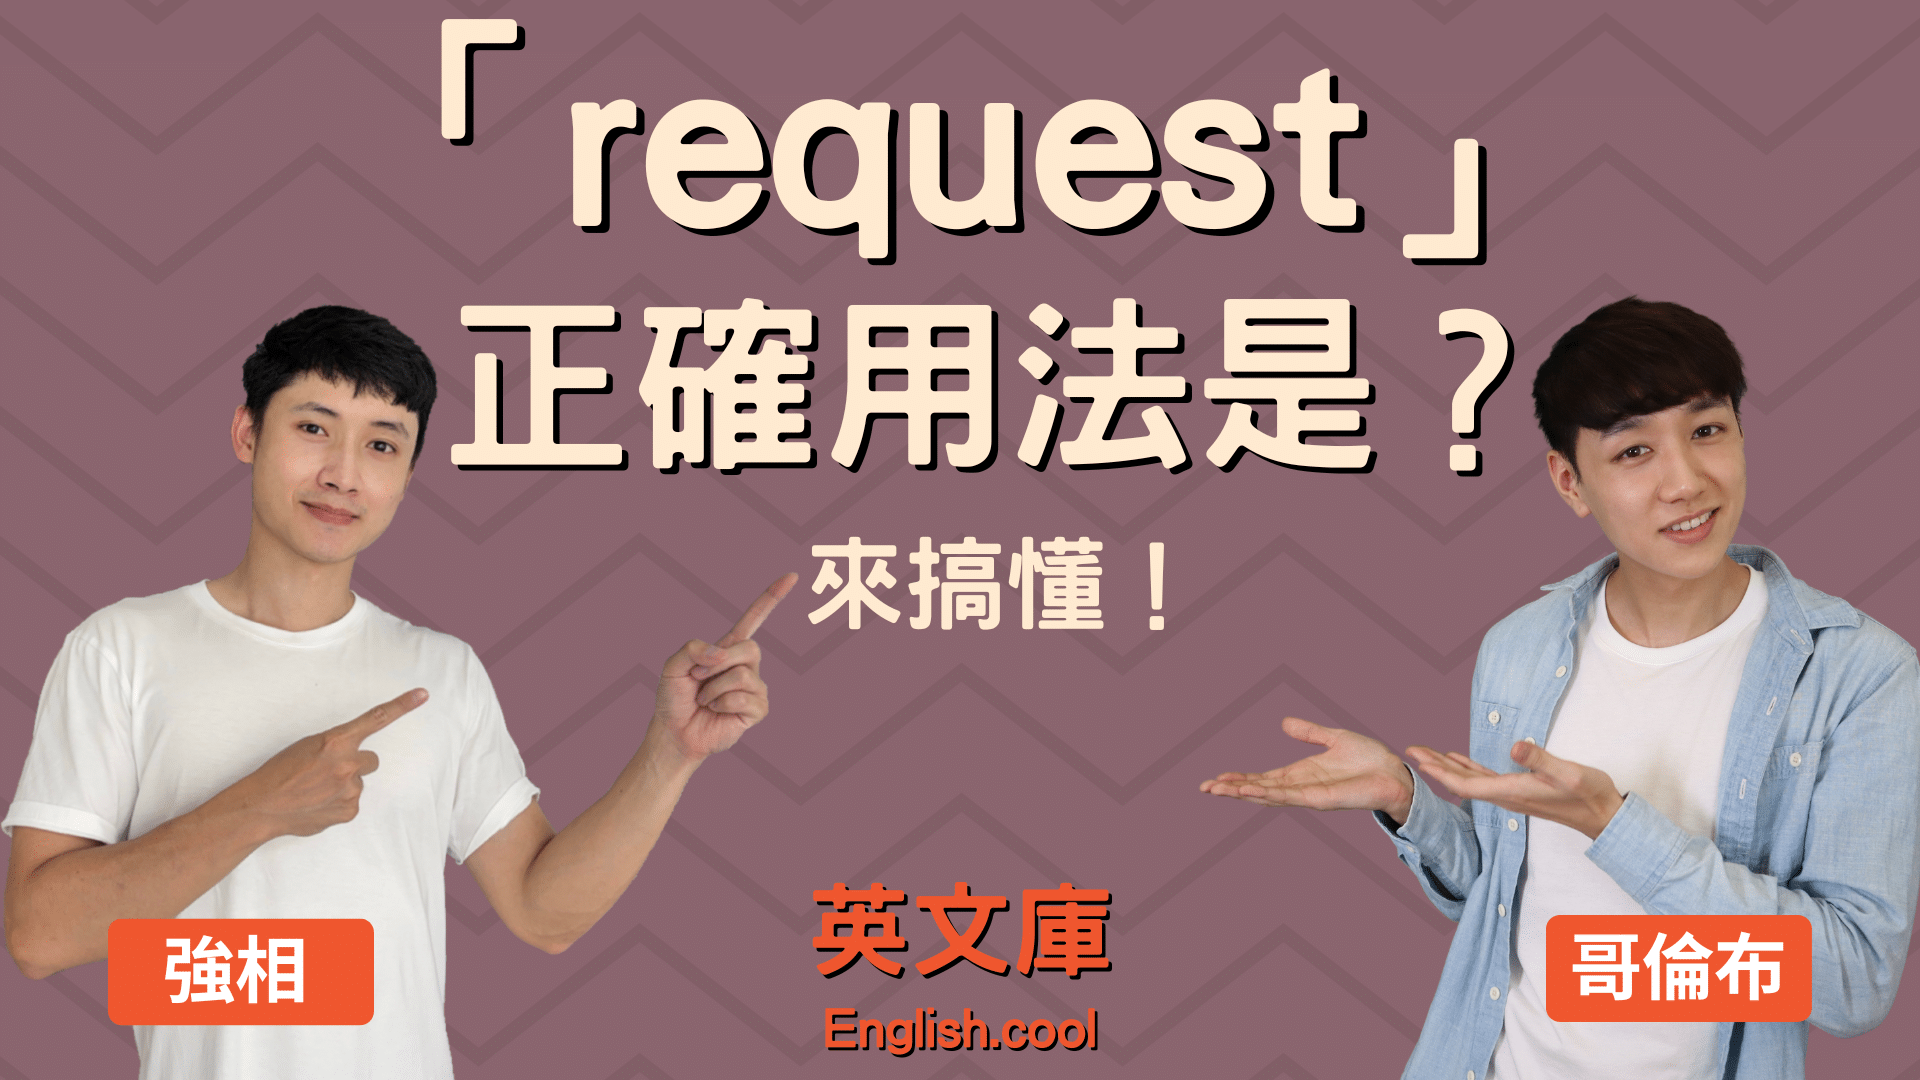 You are currently viewing Email 常出現的「request」正確用法是？來搞懂！